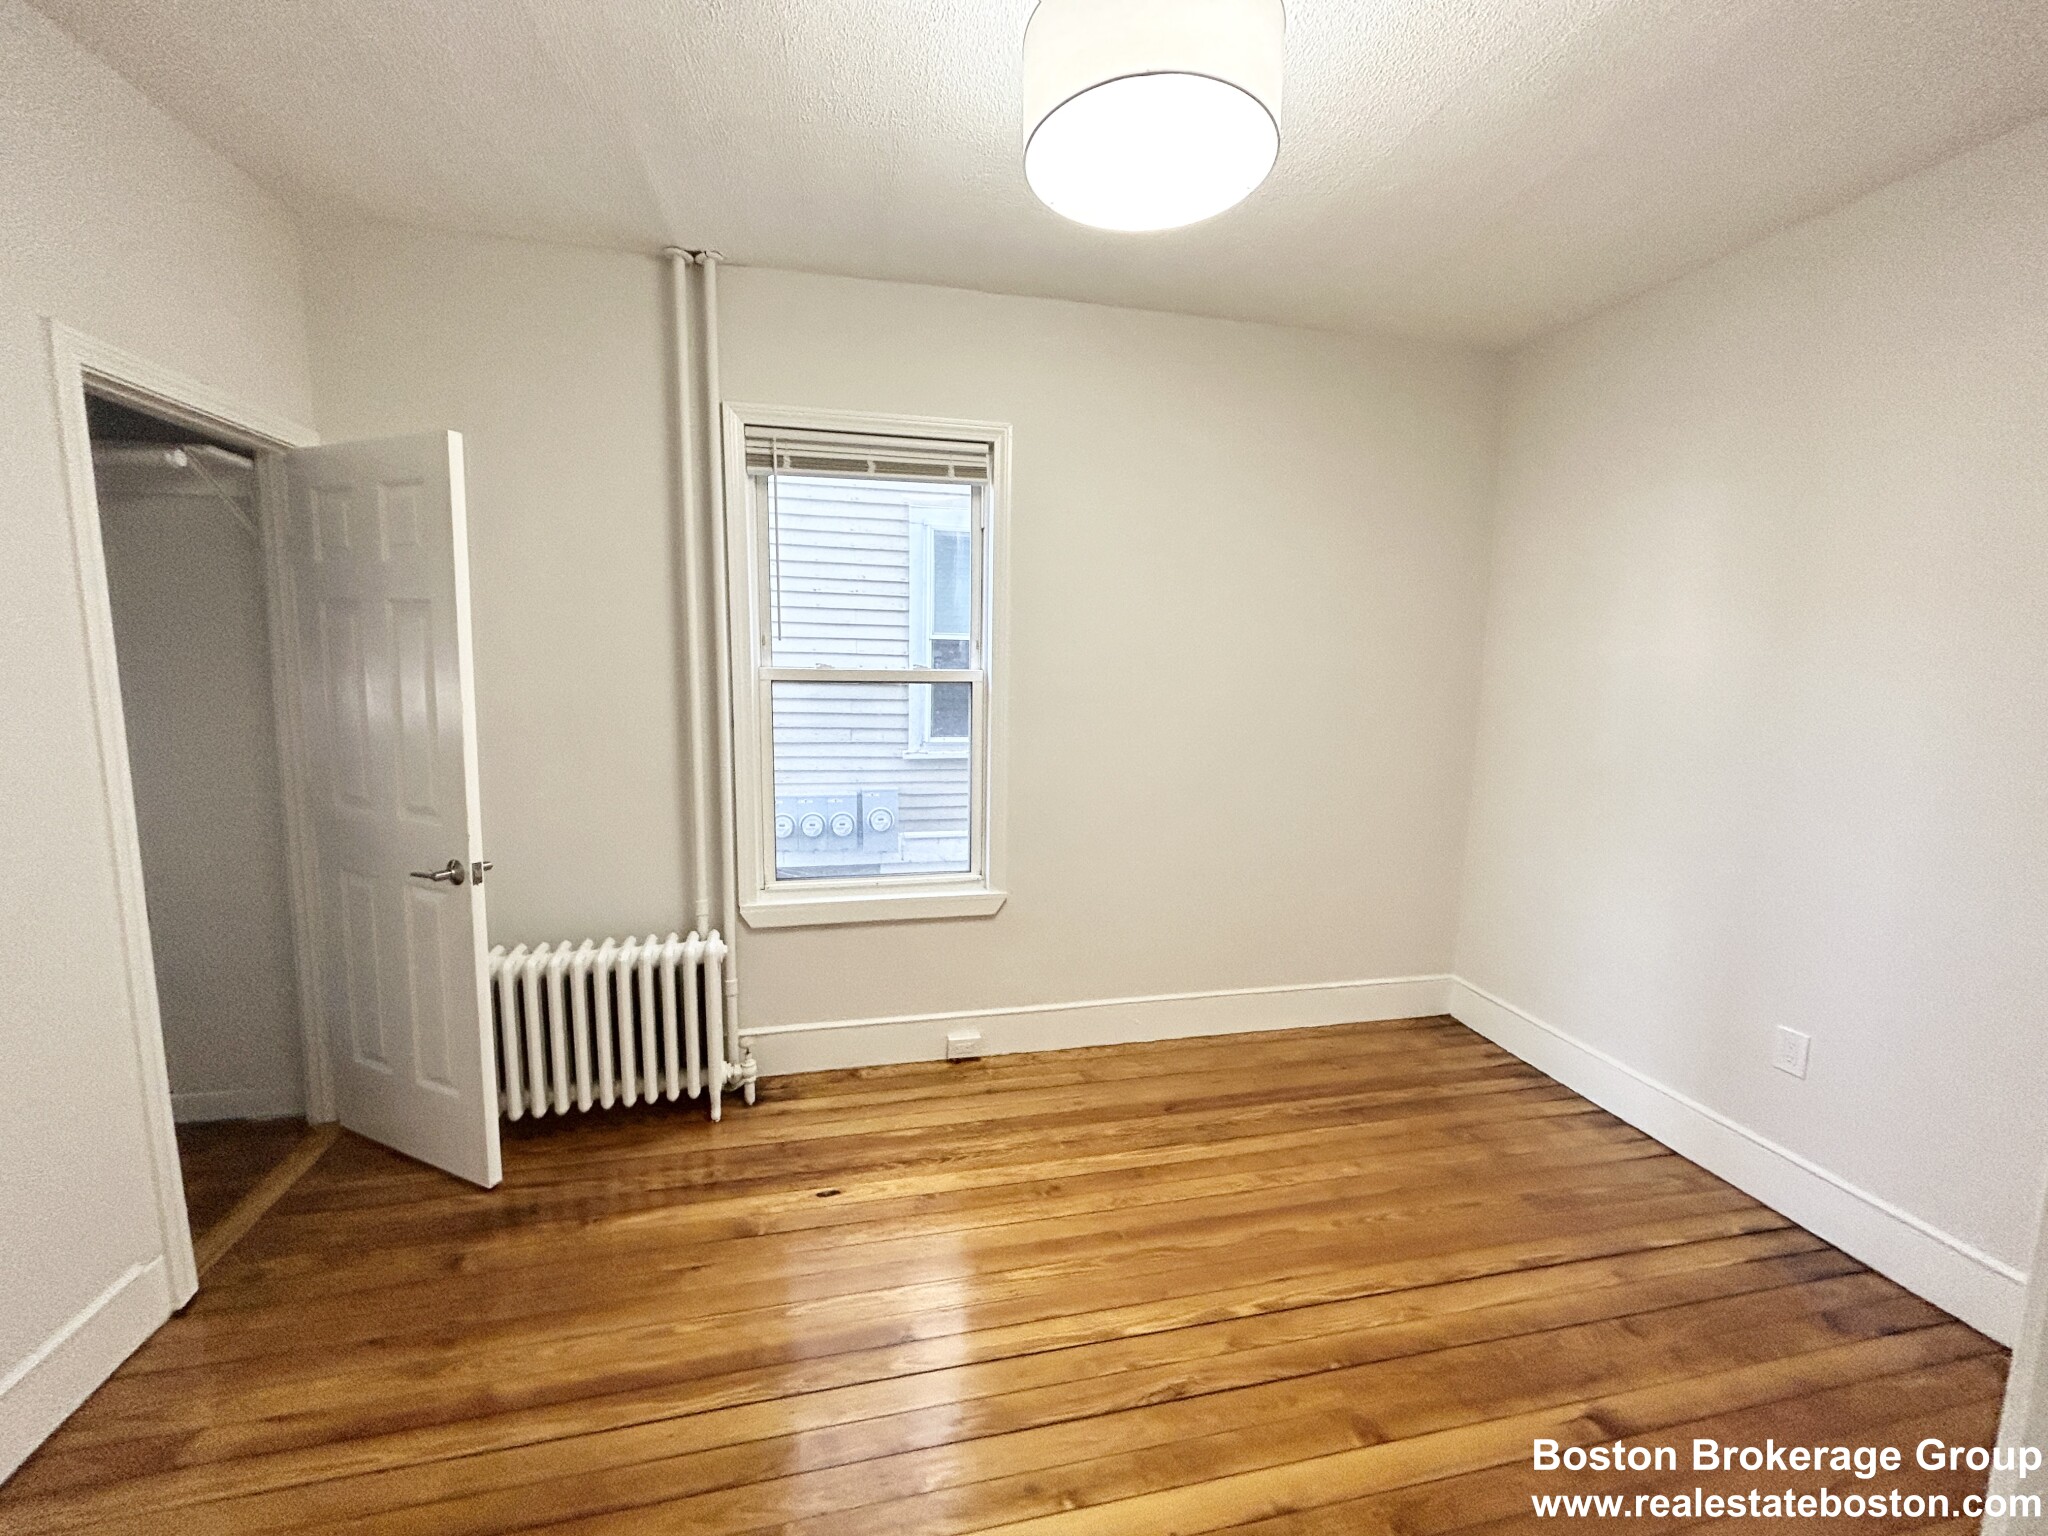 Photos of apartment on East Cottage St.,Boston MA 02125